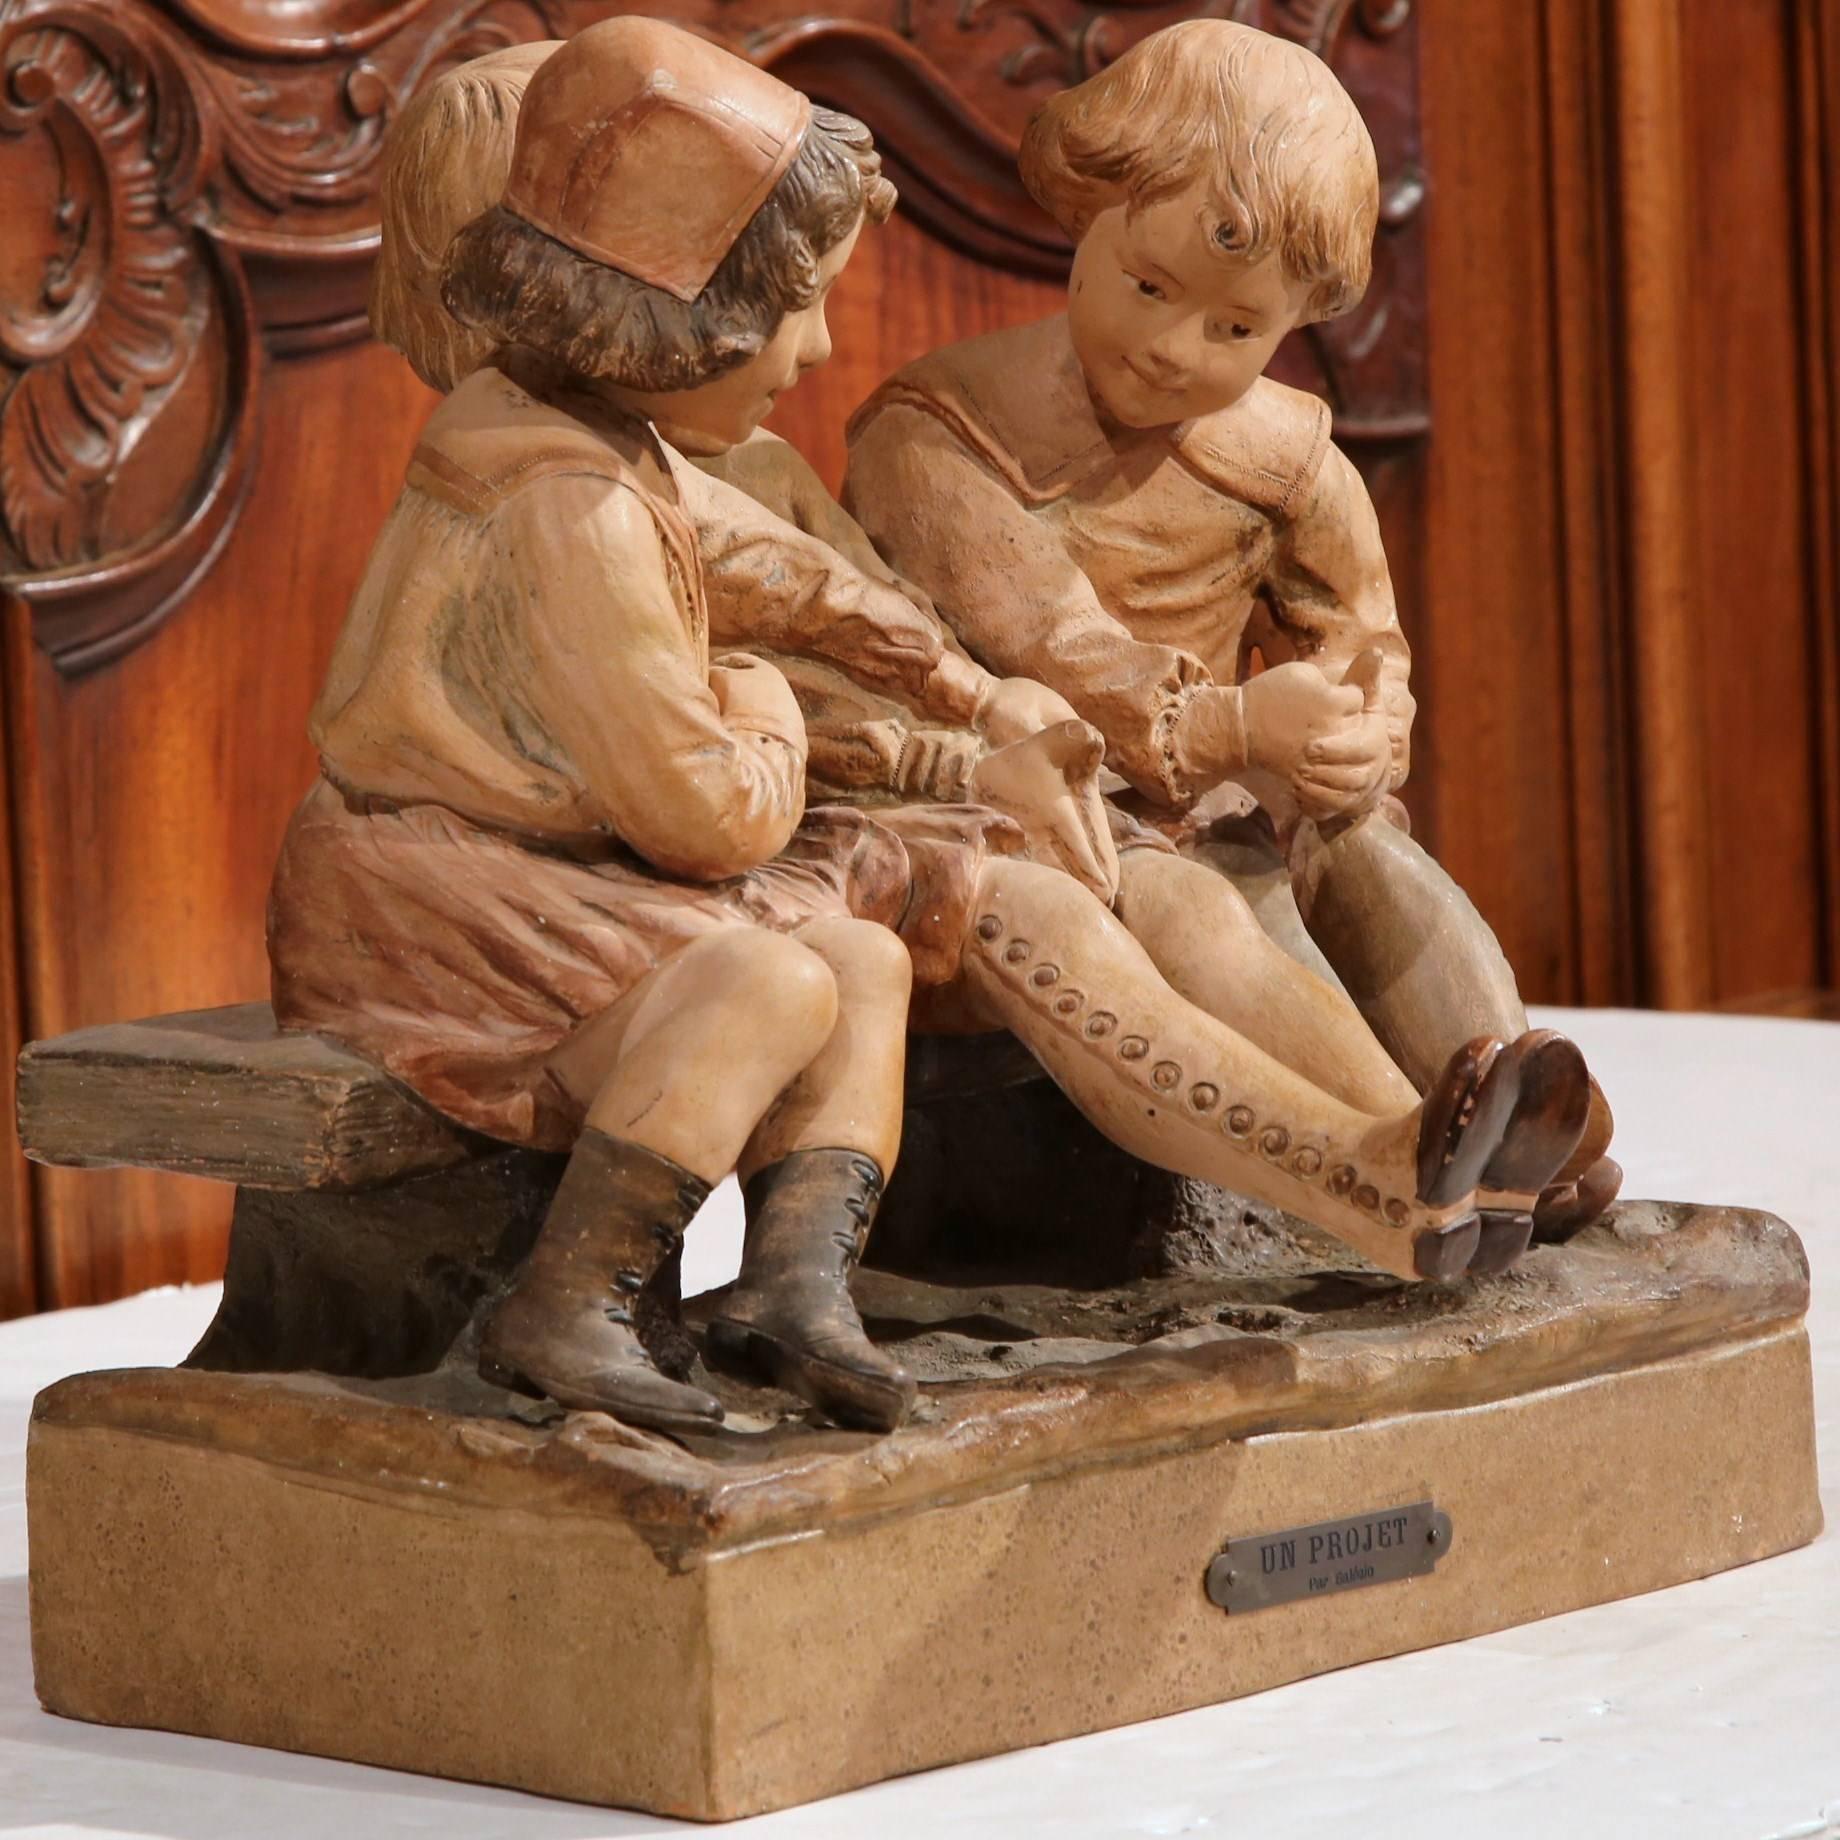 Crafted in France, circa 1880, the antique clay composition features three cheerful children in traditional clothing and boots; they are sitting on a bench, laughing and talking with each other. This work of art has beautiful detailed work with